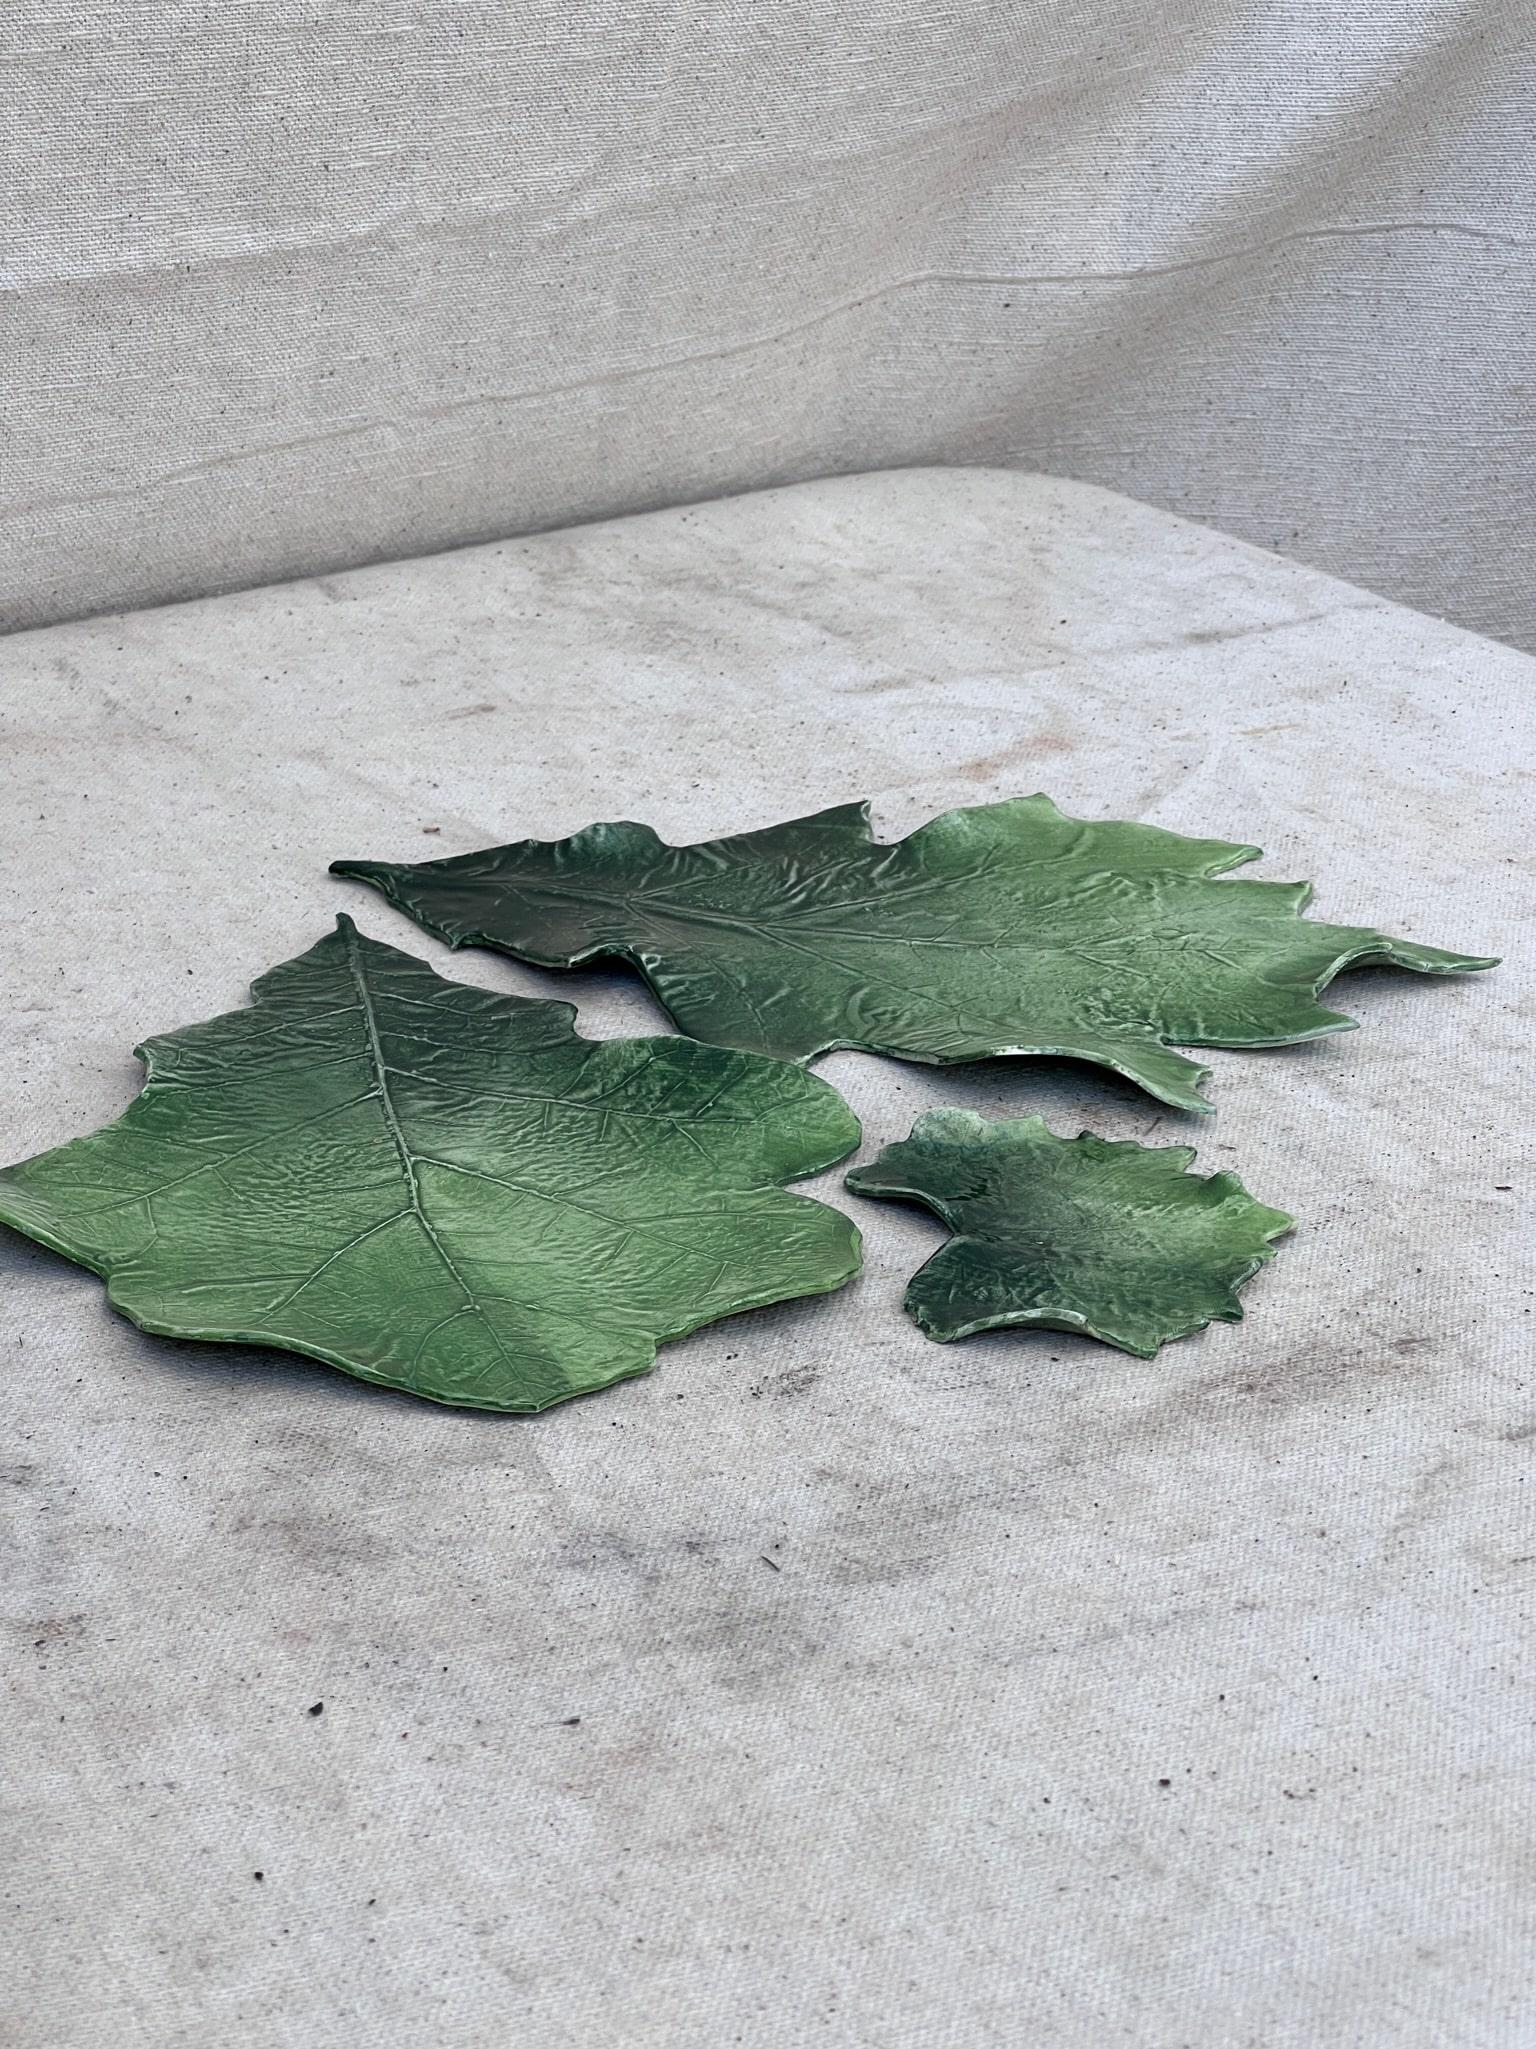 Contemporary Early 21st Century Vietri Hand-Crafted Italian Porcelain Leaf Set- 3 Pieces For Sale